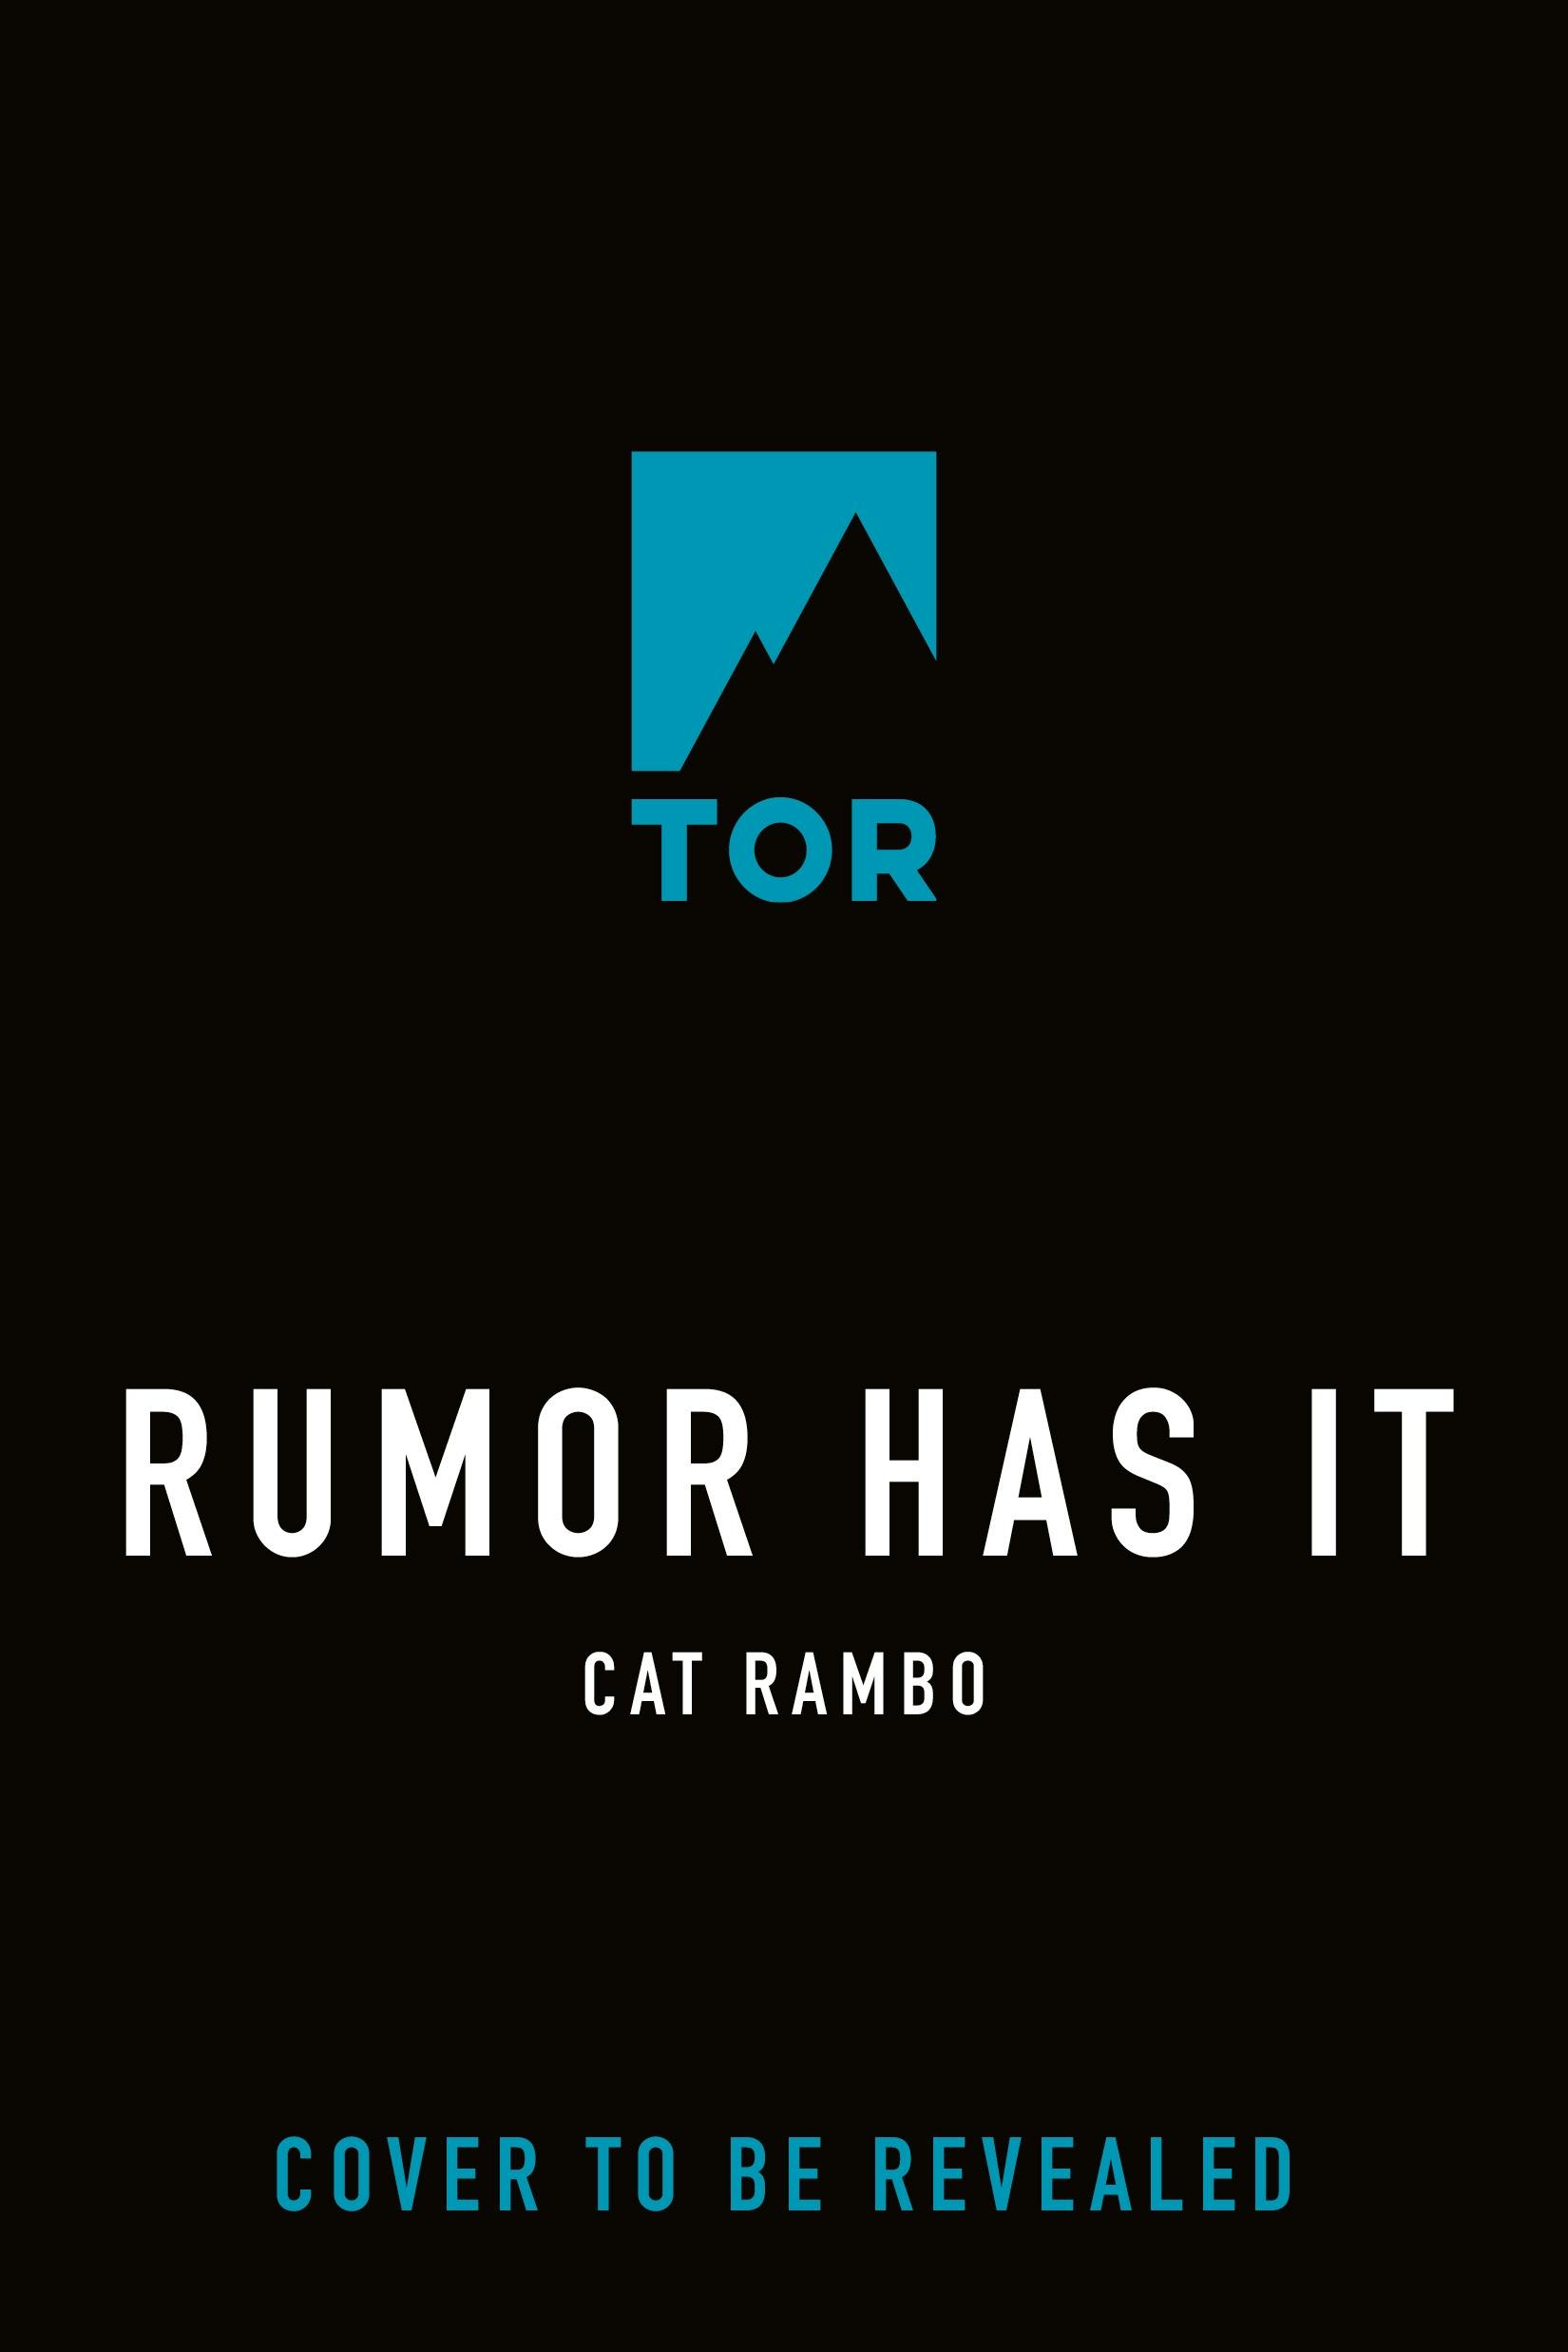 Cover for the book titled as: Rumor Has It